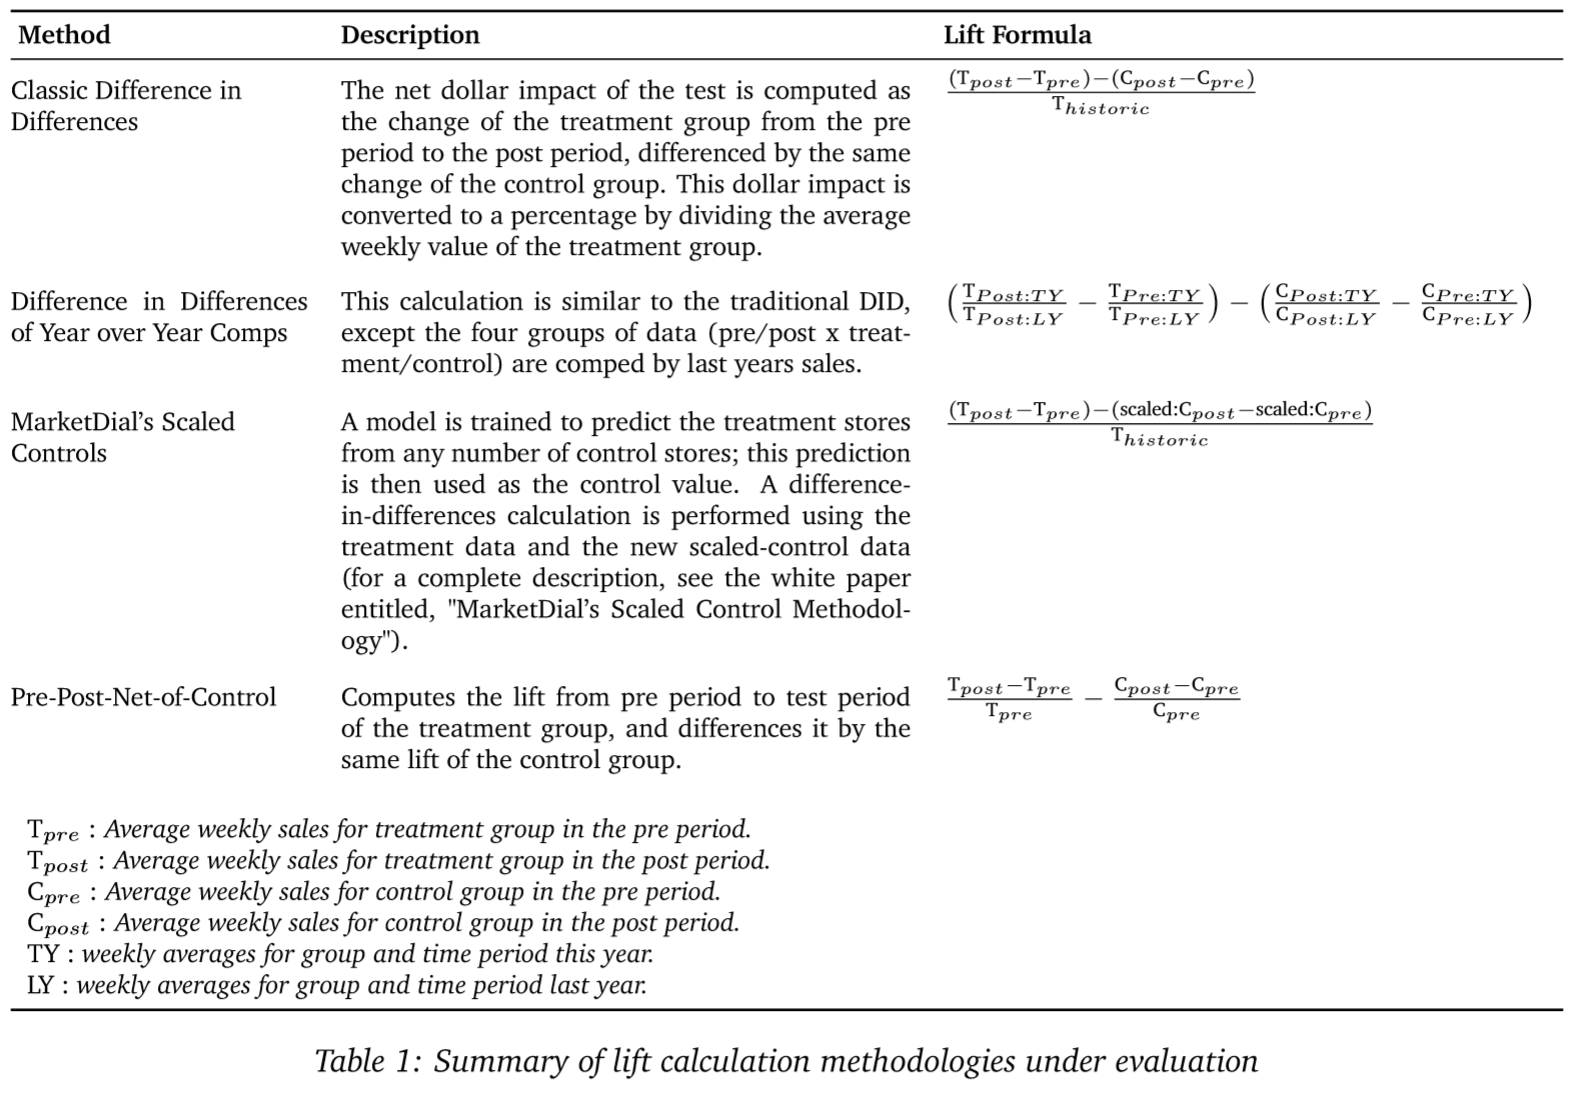 Summary of lift calculation methodologies under evaluation for control matches.